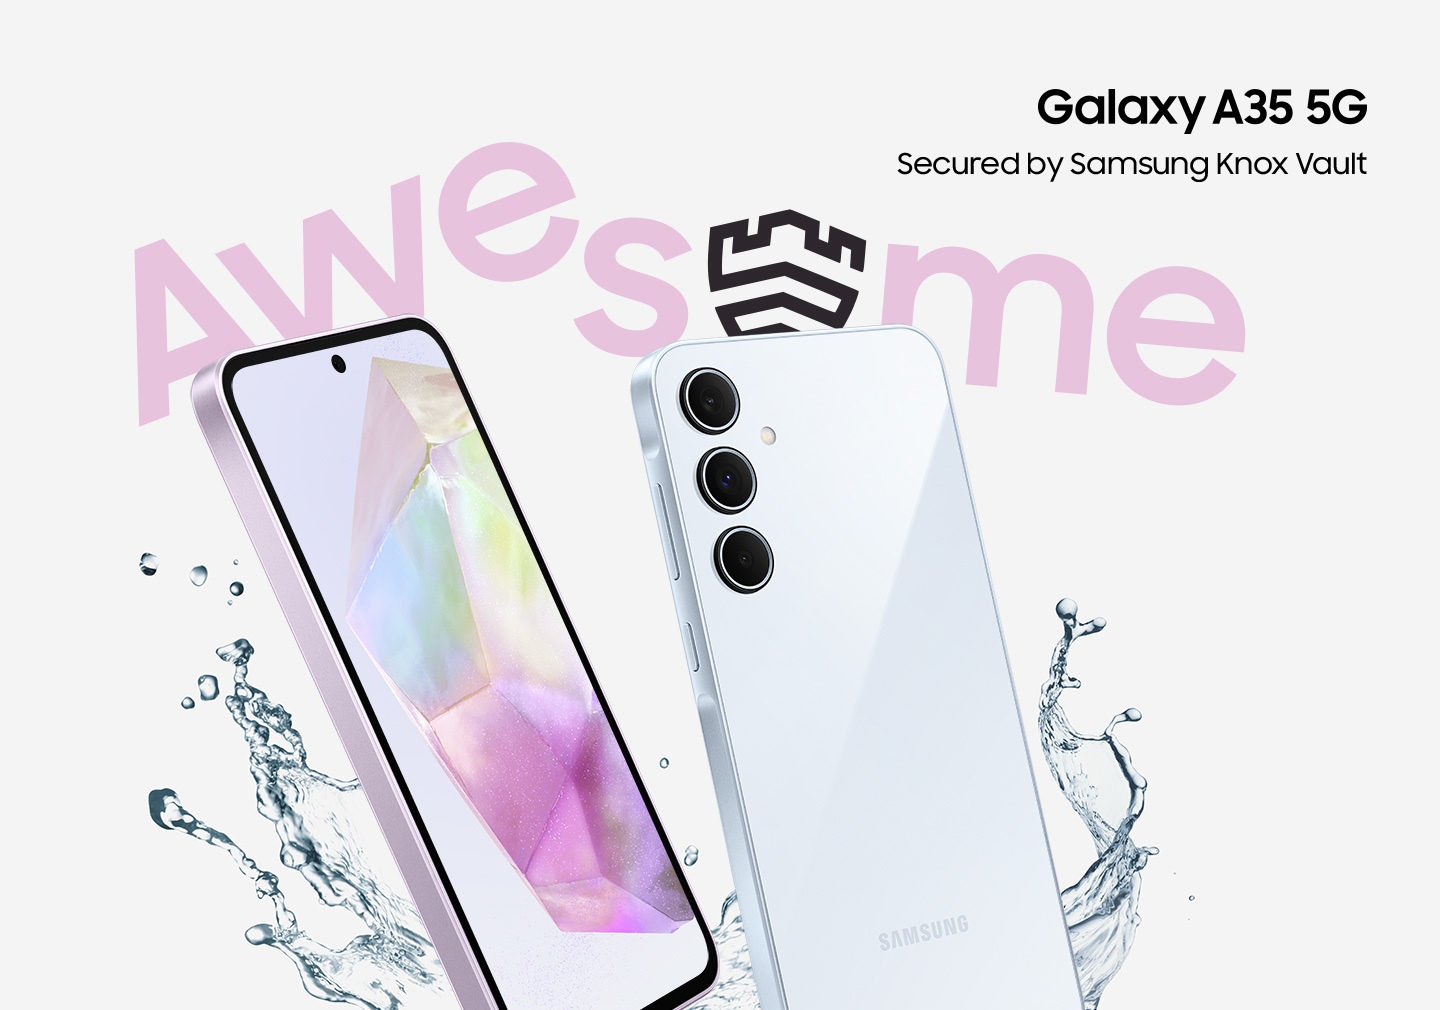 Two smartphones shown at an angle with water splashes around them with the word 'AWESOME'. The phone's screen displays a gradient wallpaper, and the back has a triple camera layout. Galaxy A35 5G logo. Text reads Secured by Samsung Knox Vault.